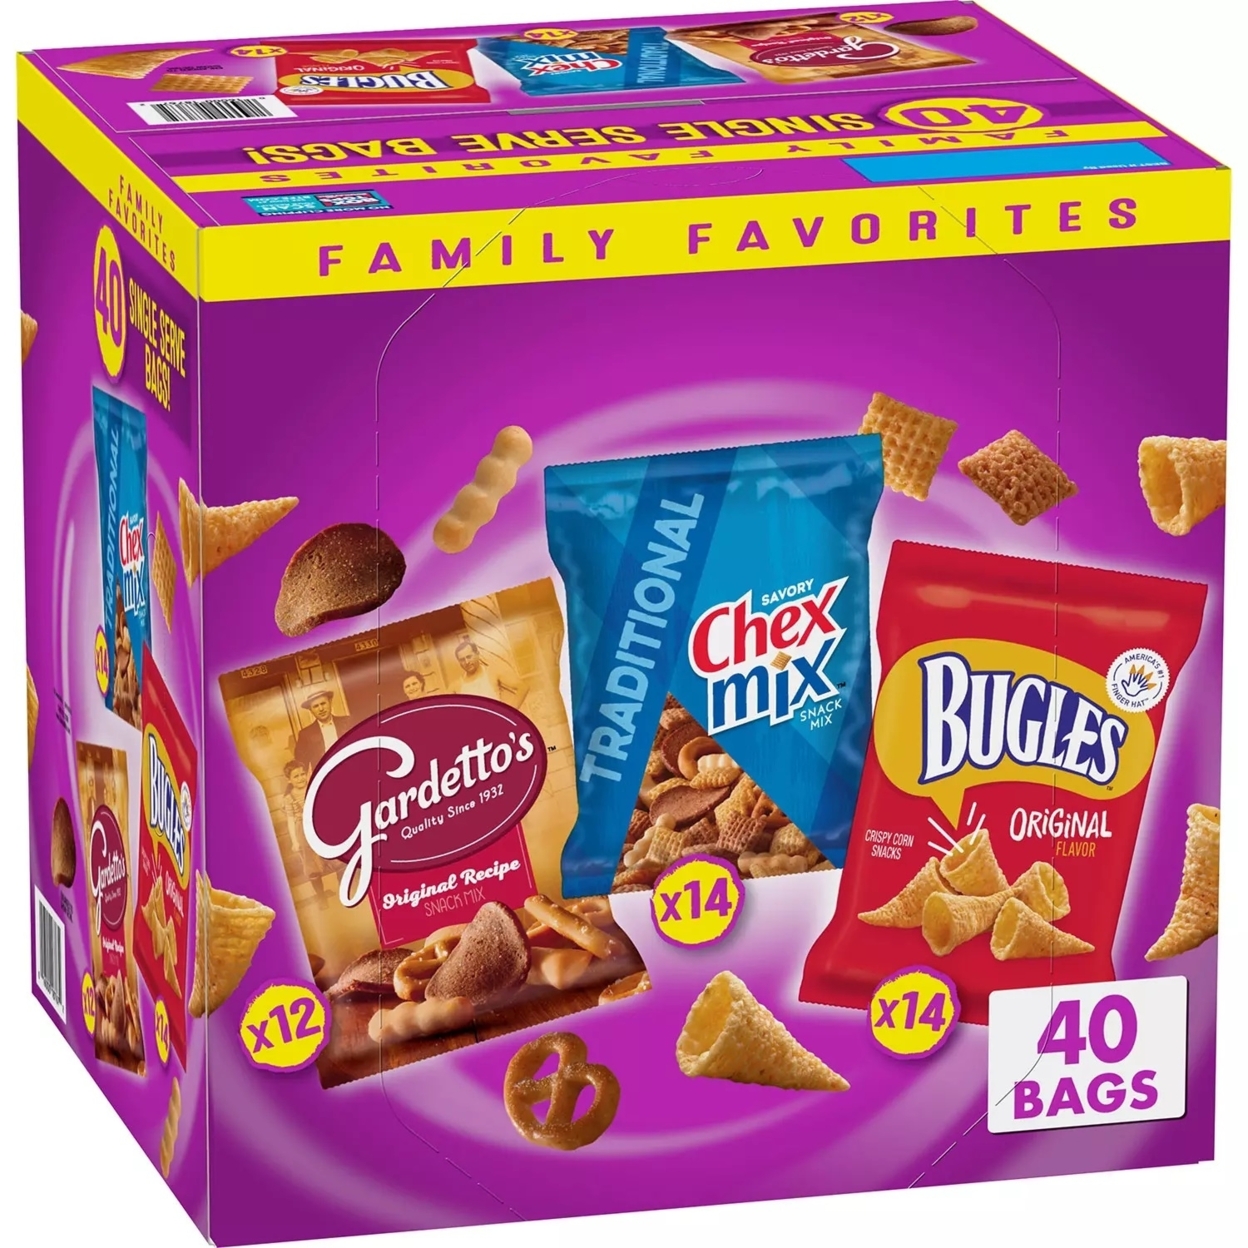 Bugles, ChexMix And Gardetto Variety Pack (40 Count)